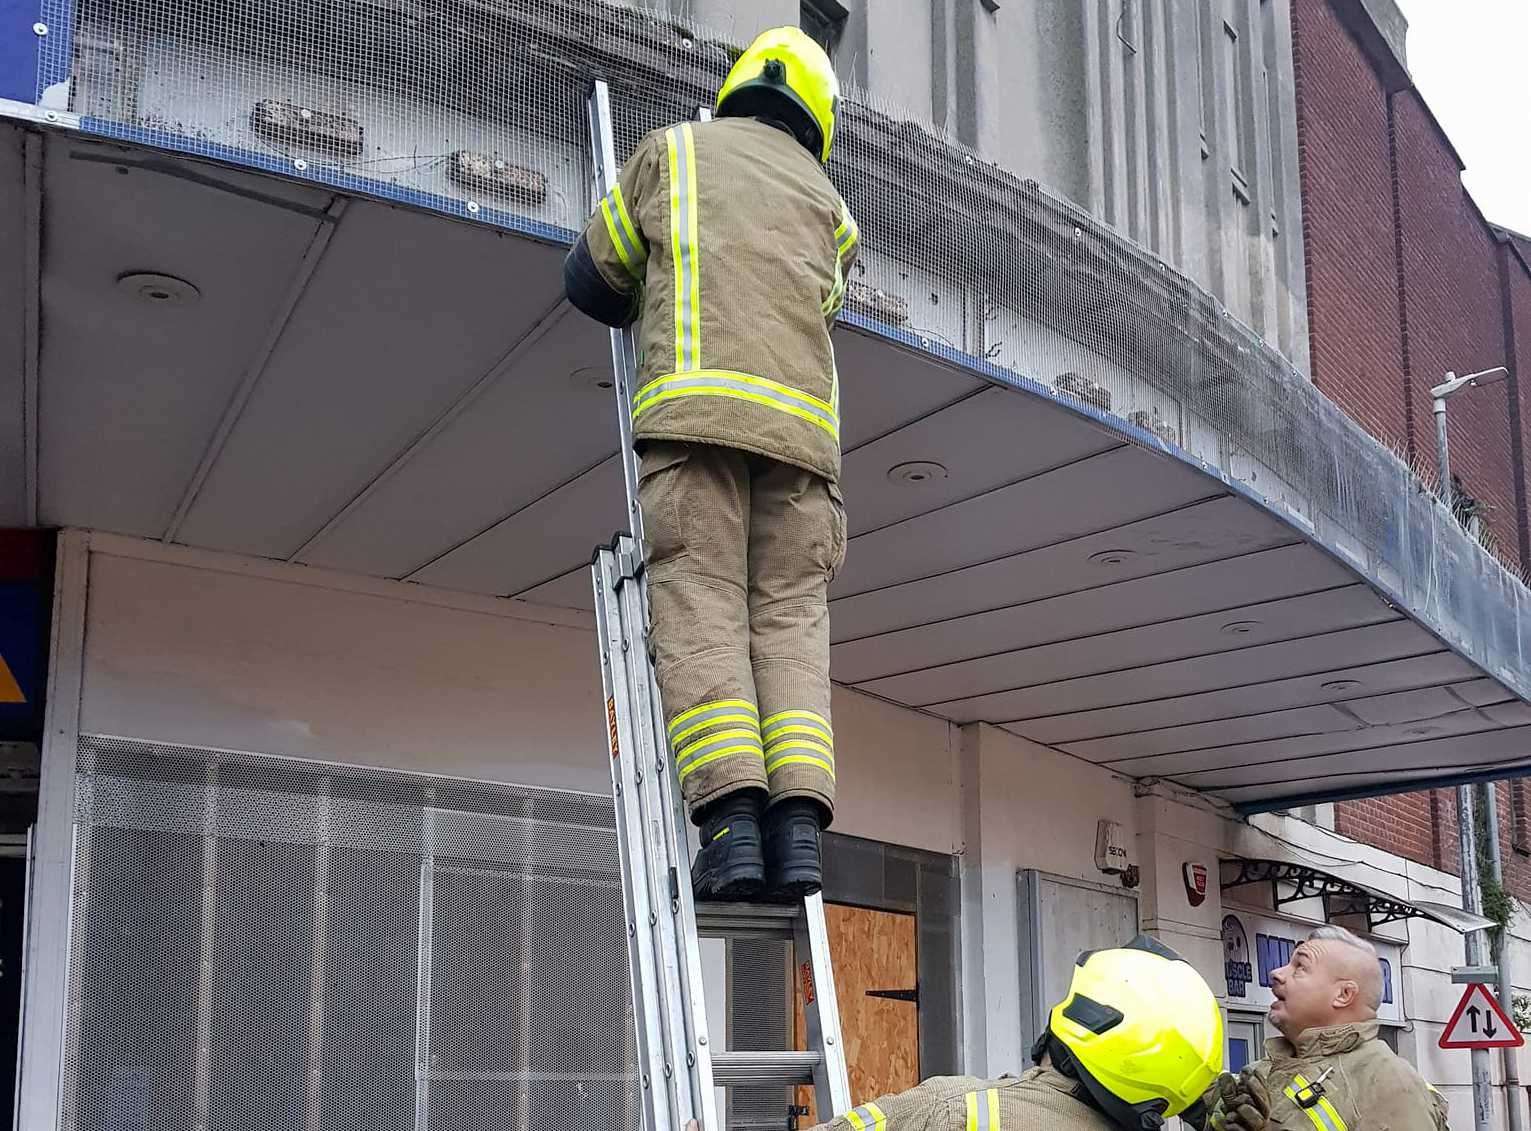 One fire engine attended, and crews removed part of the soffit to allow the birds to escape. Picture: Kent Wildlife Rescue Service